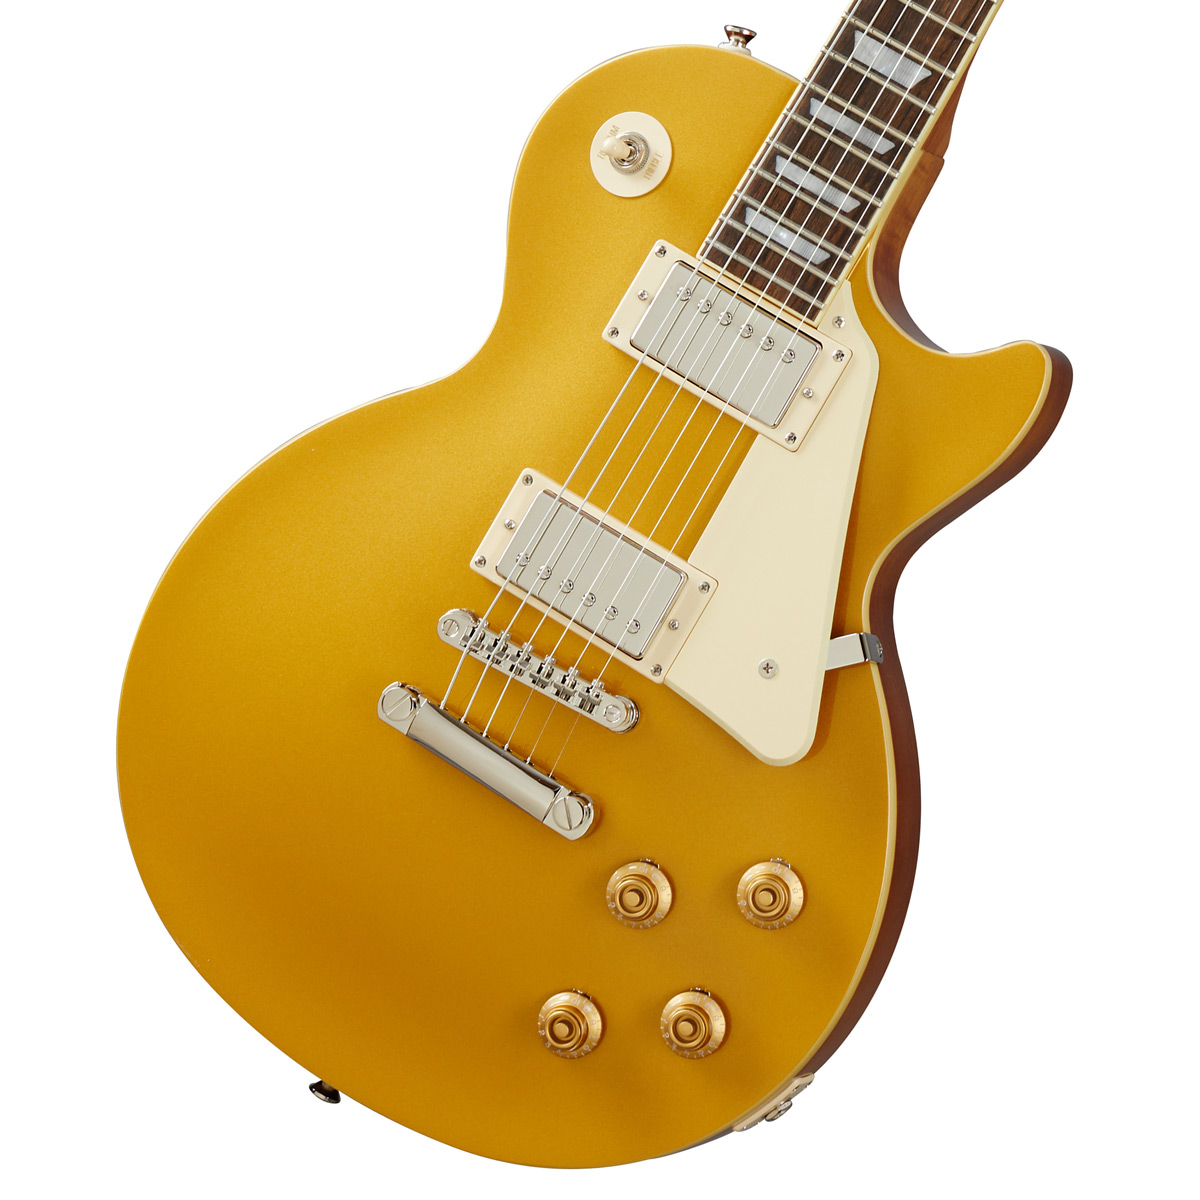 Epiphone / Inspired by Gibson Les Paul Standard 50s Metallic Gold エレキギター  レスポール スタンダード